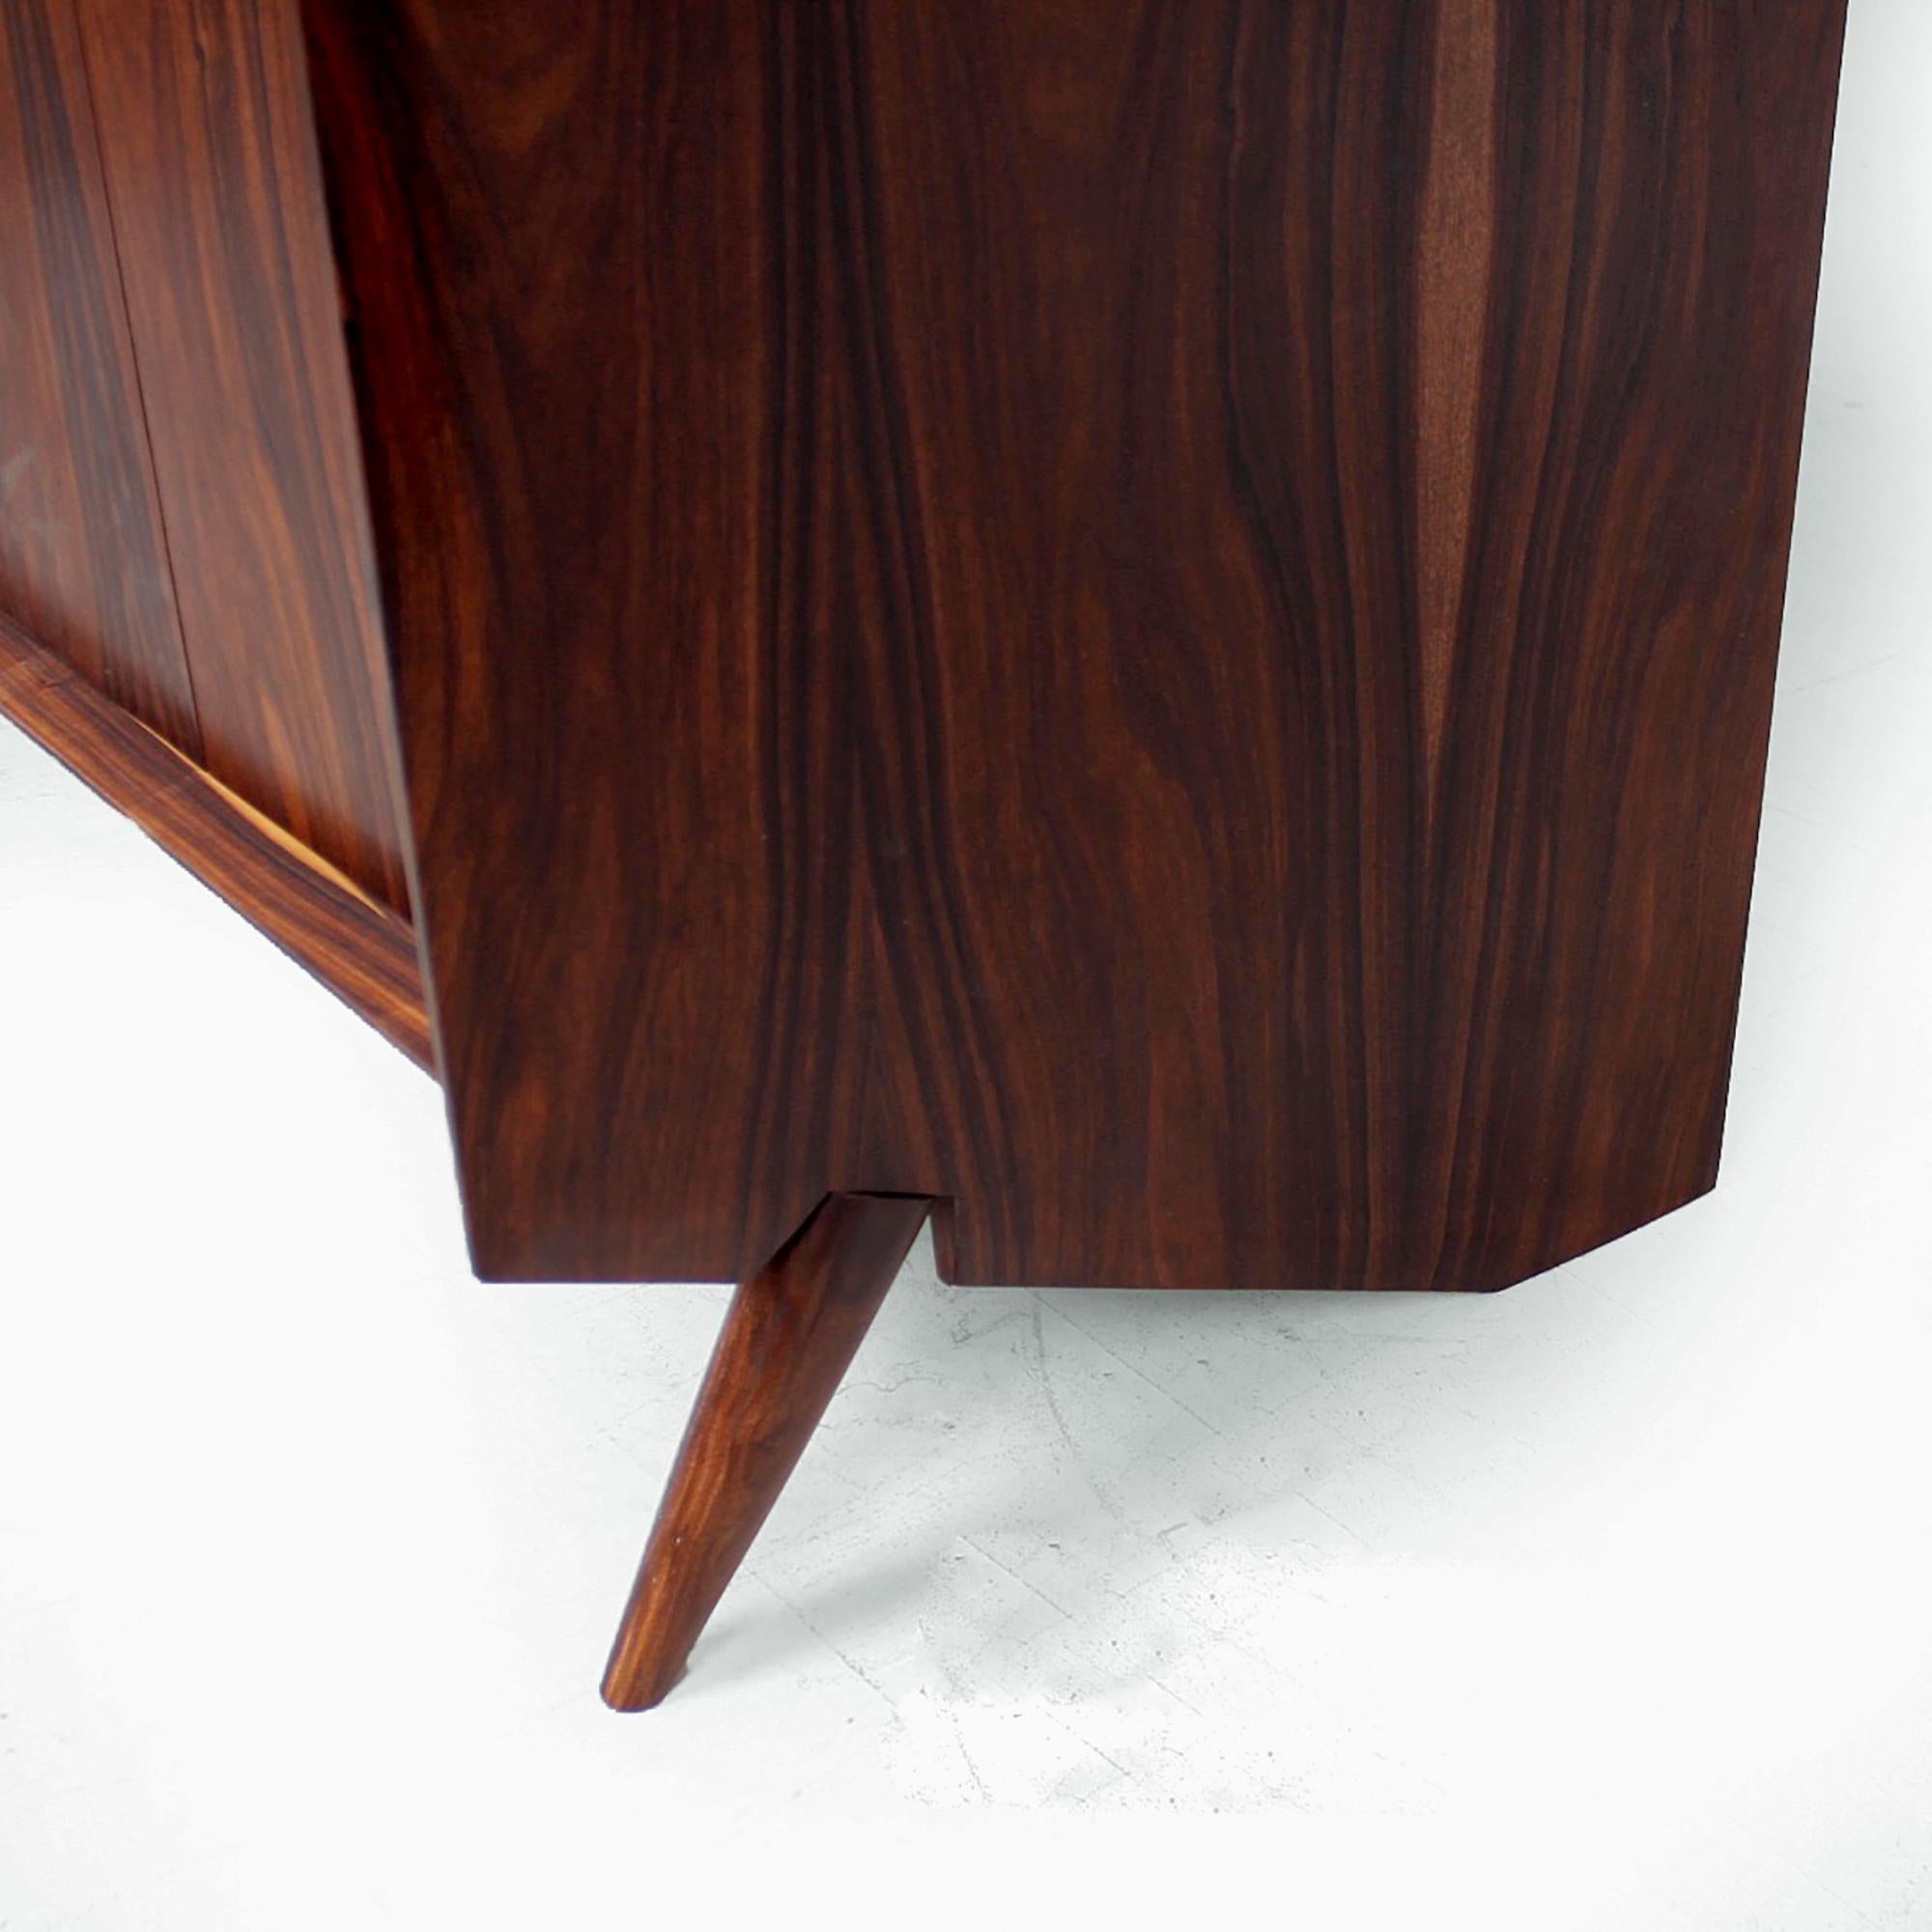 Contemporary Ravishing Rosewood Armoire Gentleman's Cabinet Pablo Romo for Ambianic 2016